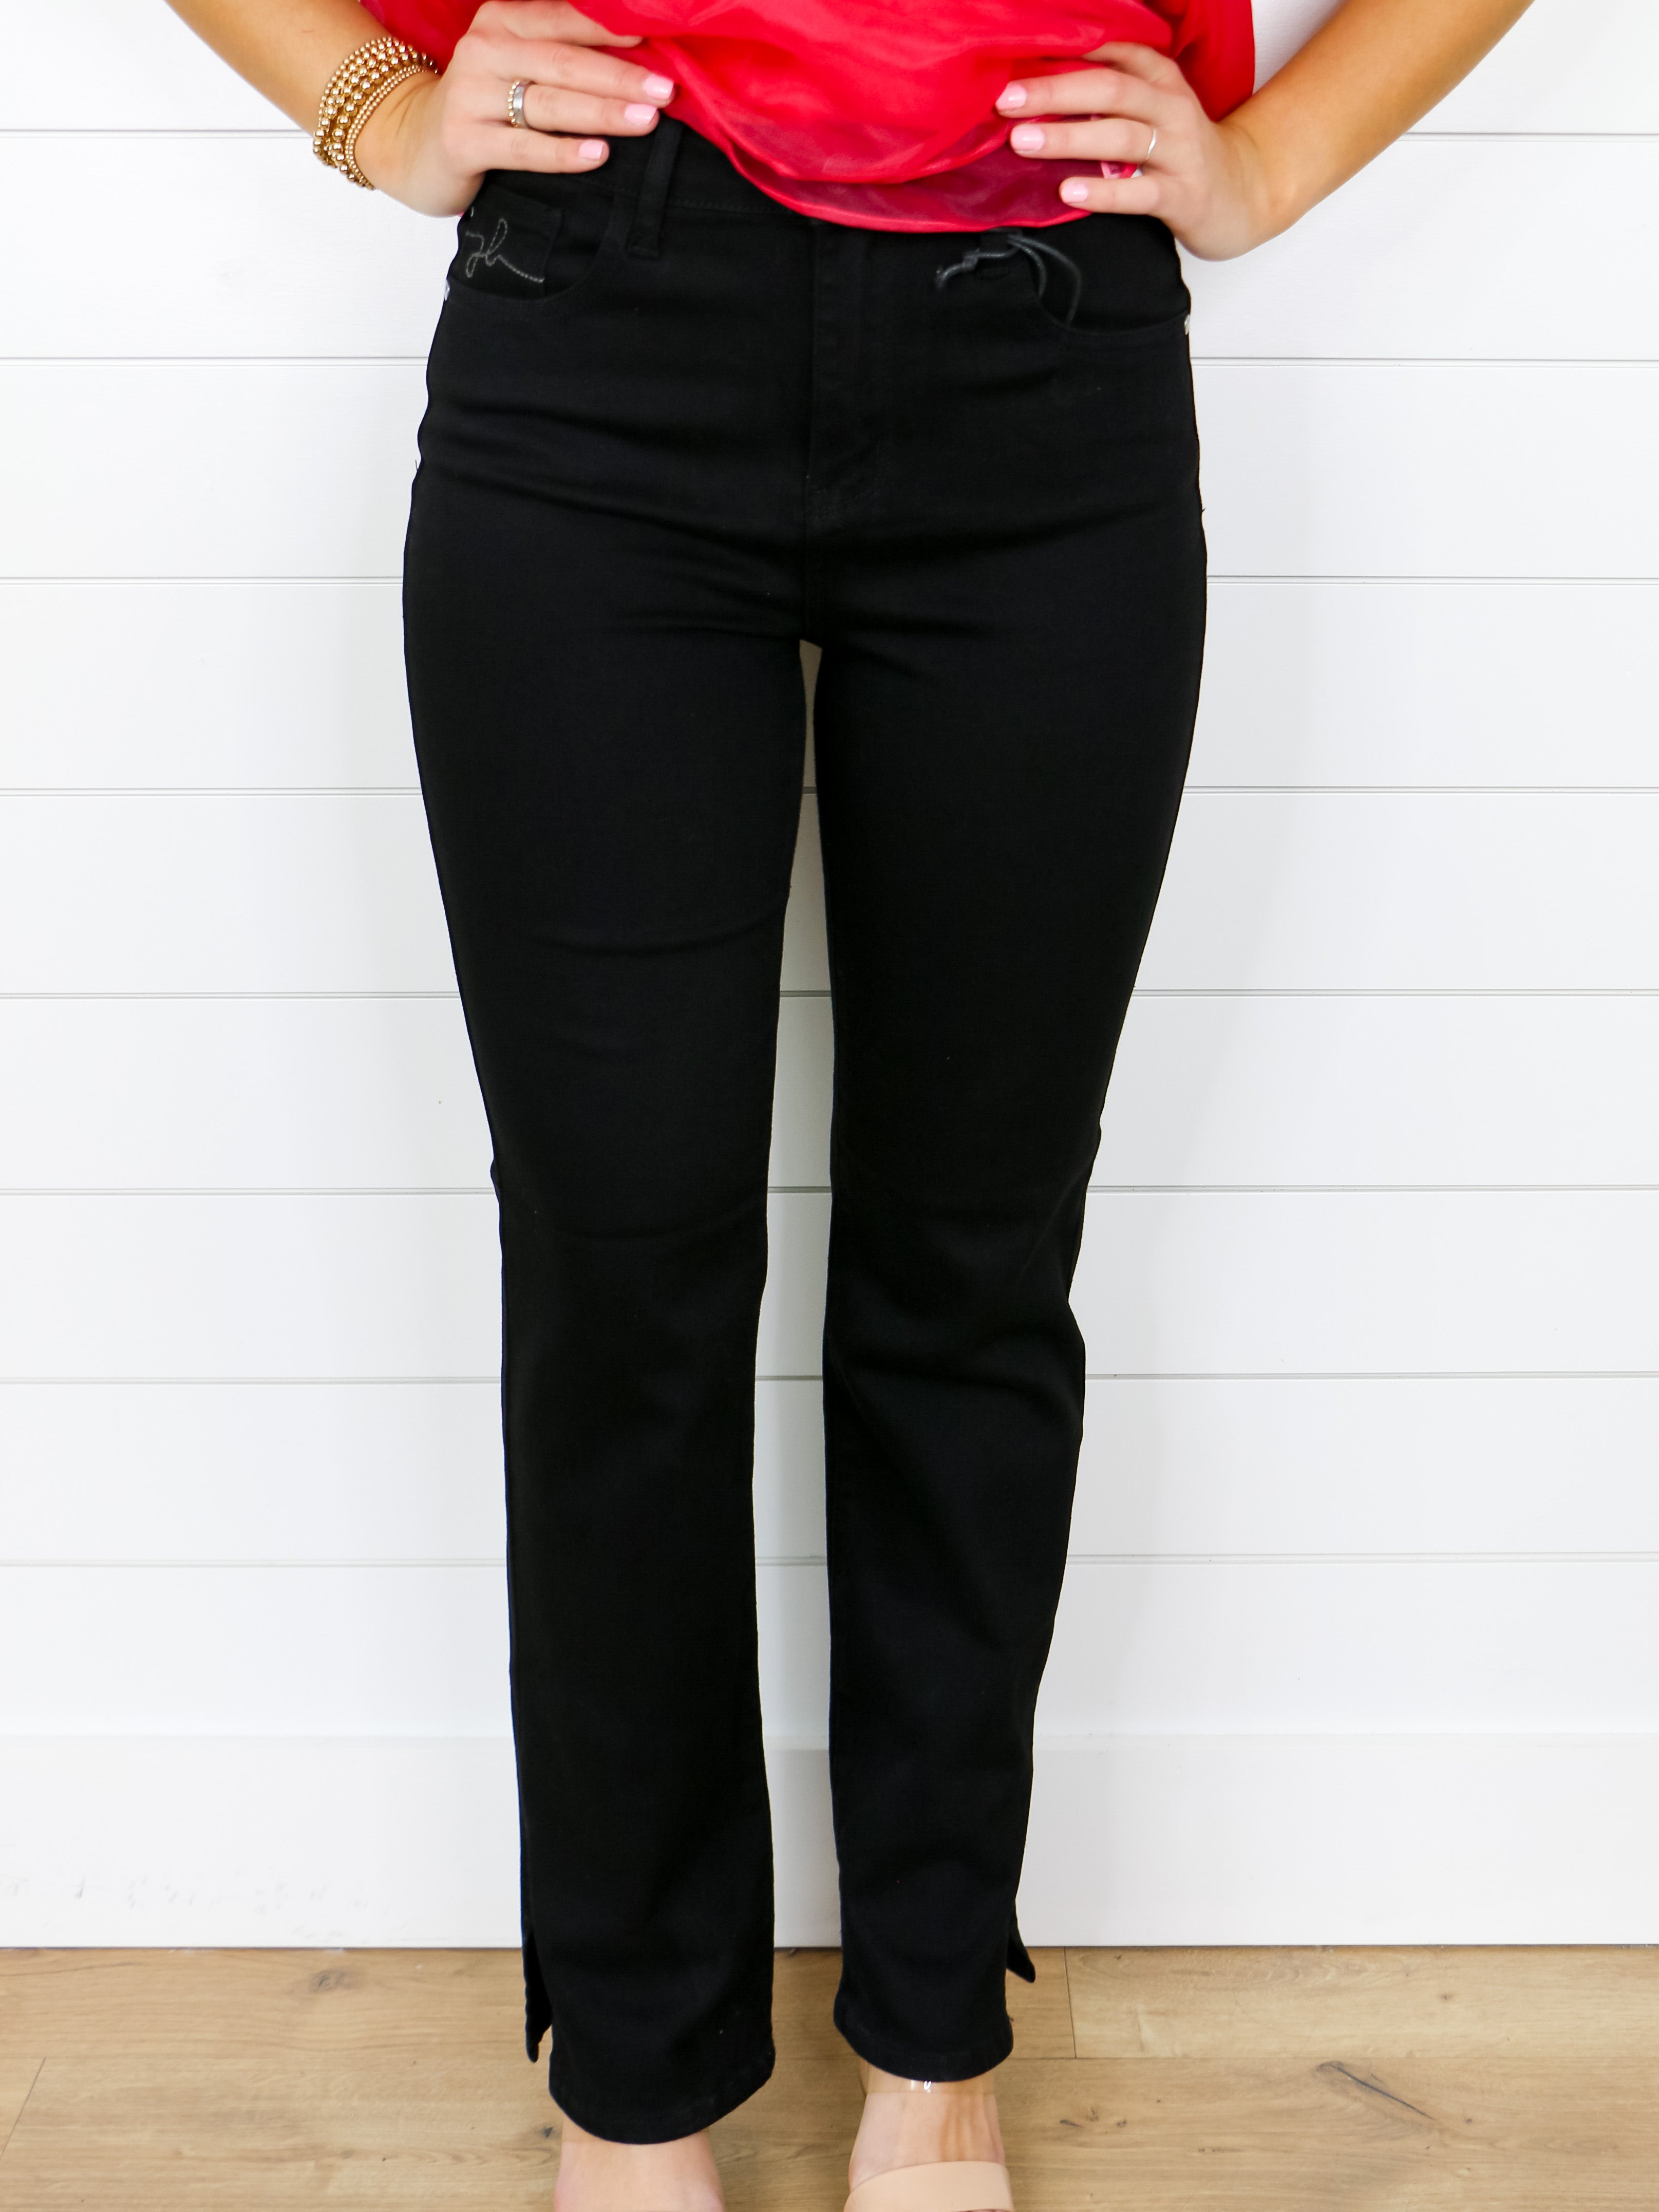 Addy Black Straight Jeans